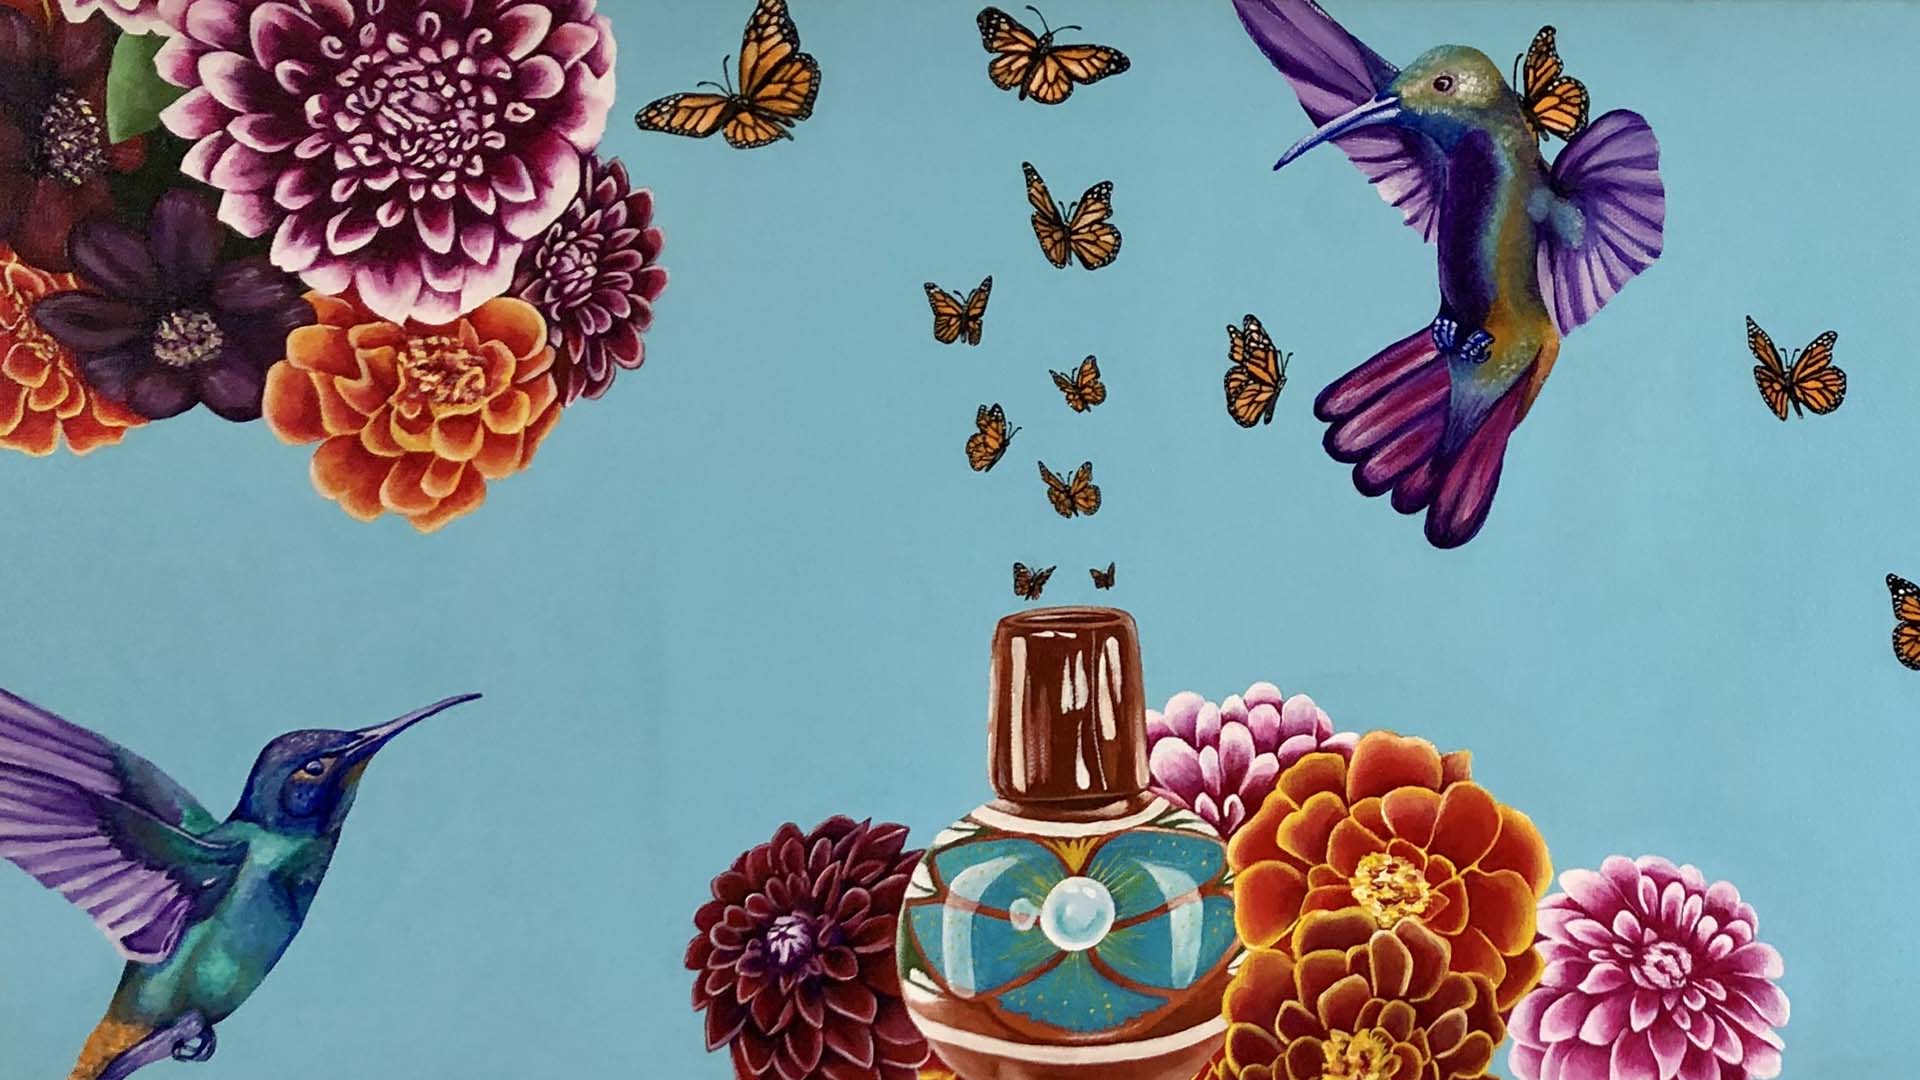 Painting of flowers, hummingbirds, monarch butterflies, and pottery on a blue background